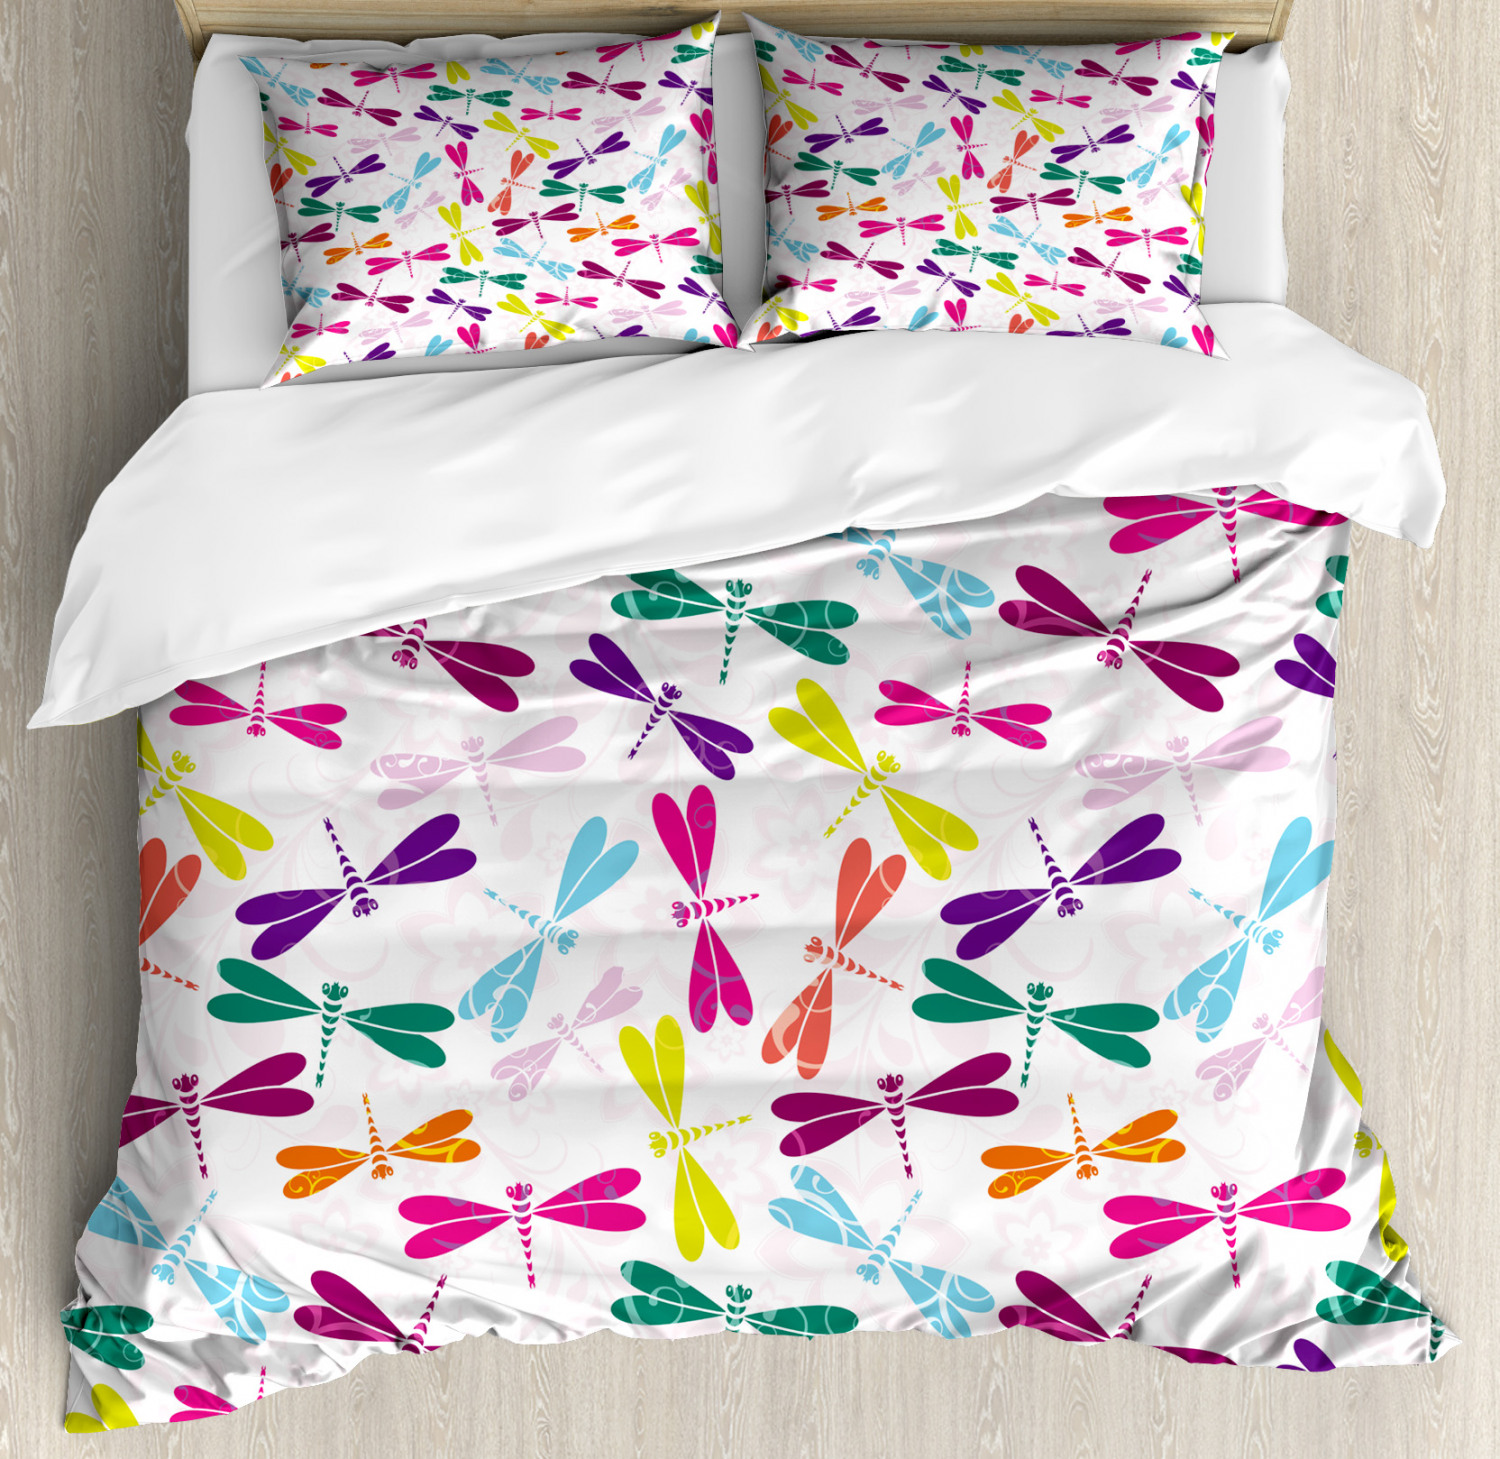 Purple Dragonfly Duvet Cover Pillow Case Twin/Full/Queen/King Bedding Set Animal 